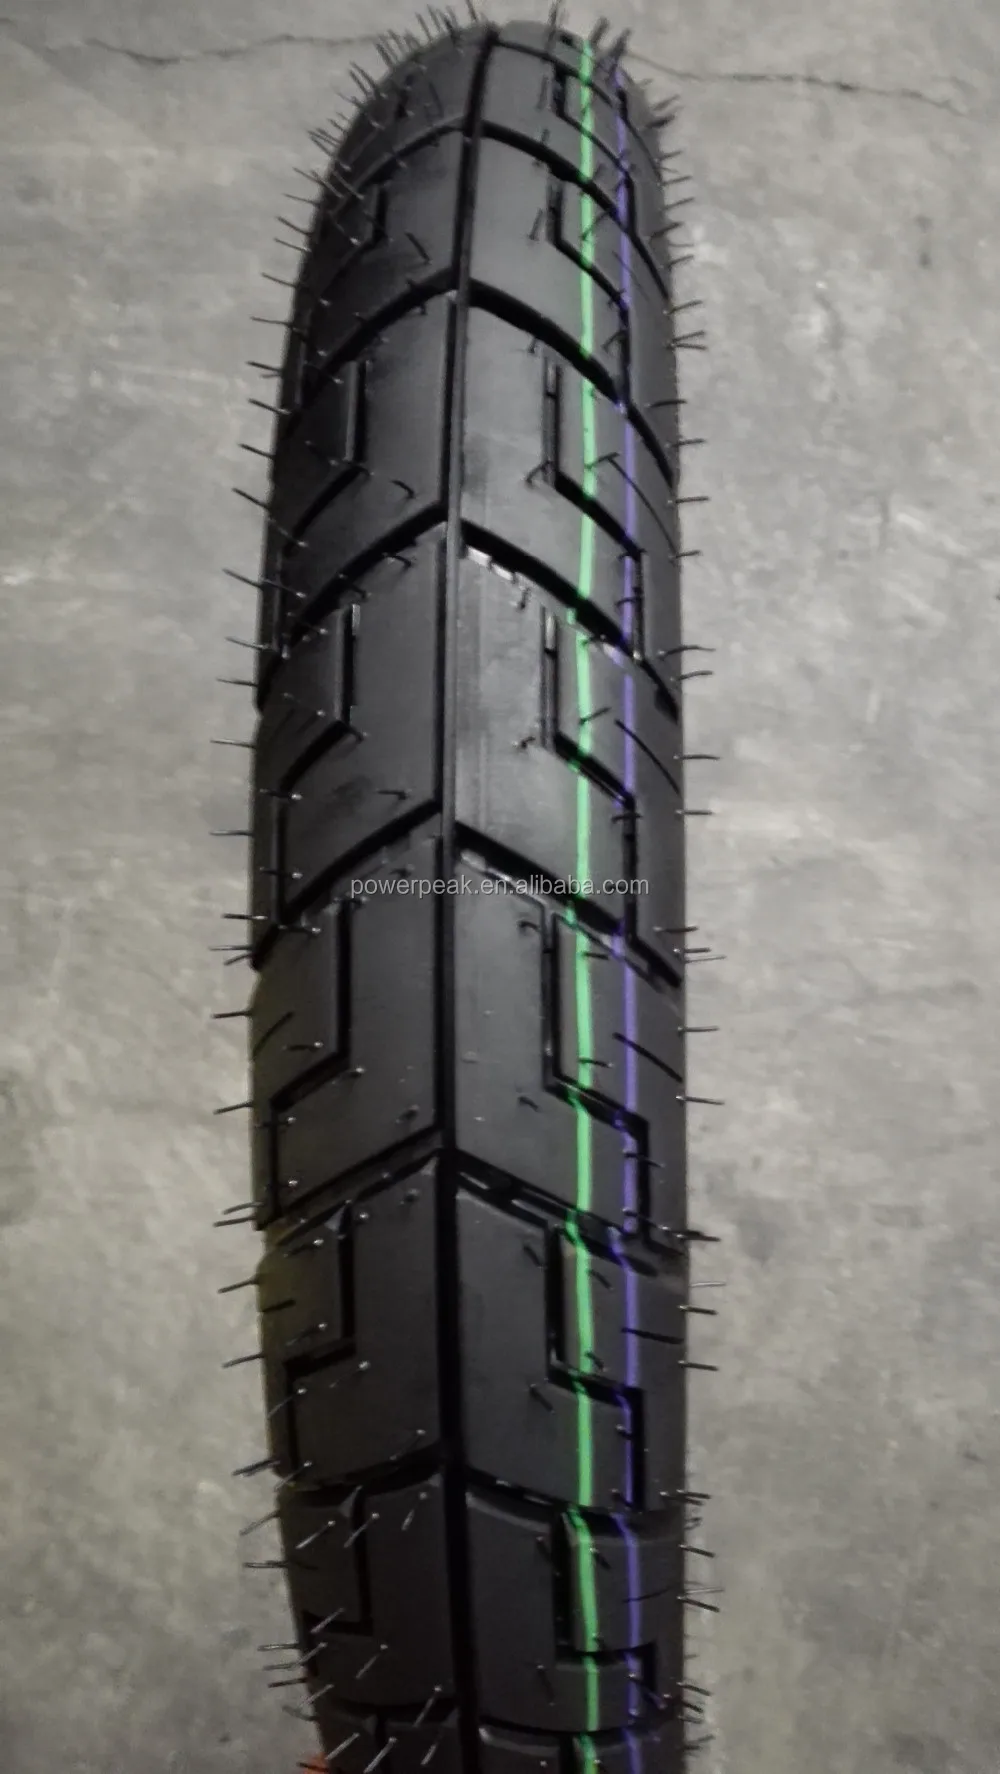 New Design Tubeless Motorcycle Tire 90 90 18 90 90 18 90 90 18 Buy Motorcycle Tire 90 90 18 90 90 18 Tubeless 90 90 18 Tire Product On Alibaba Com